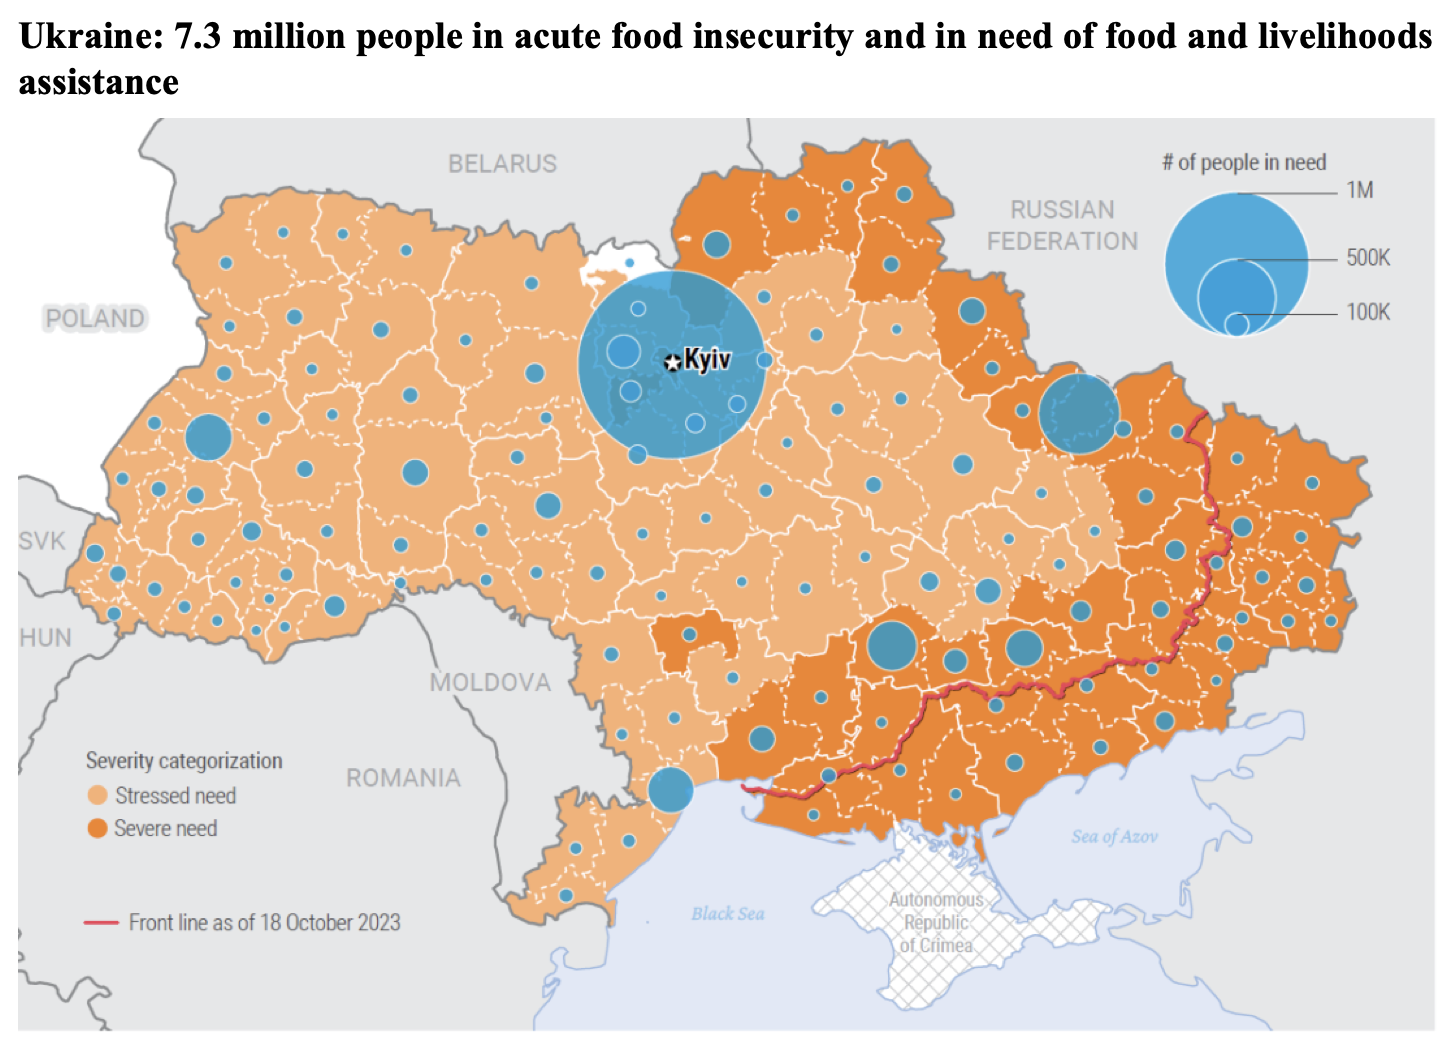 Map showing levels of food insecurity across Ukraine